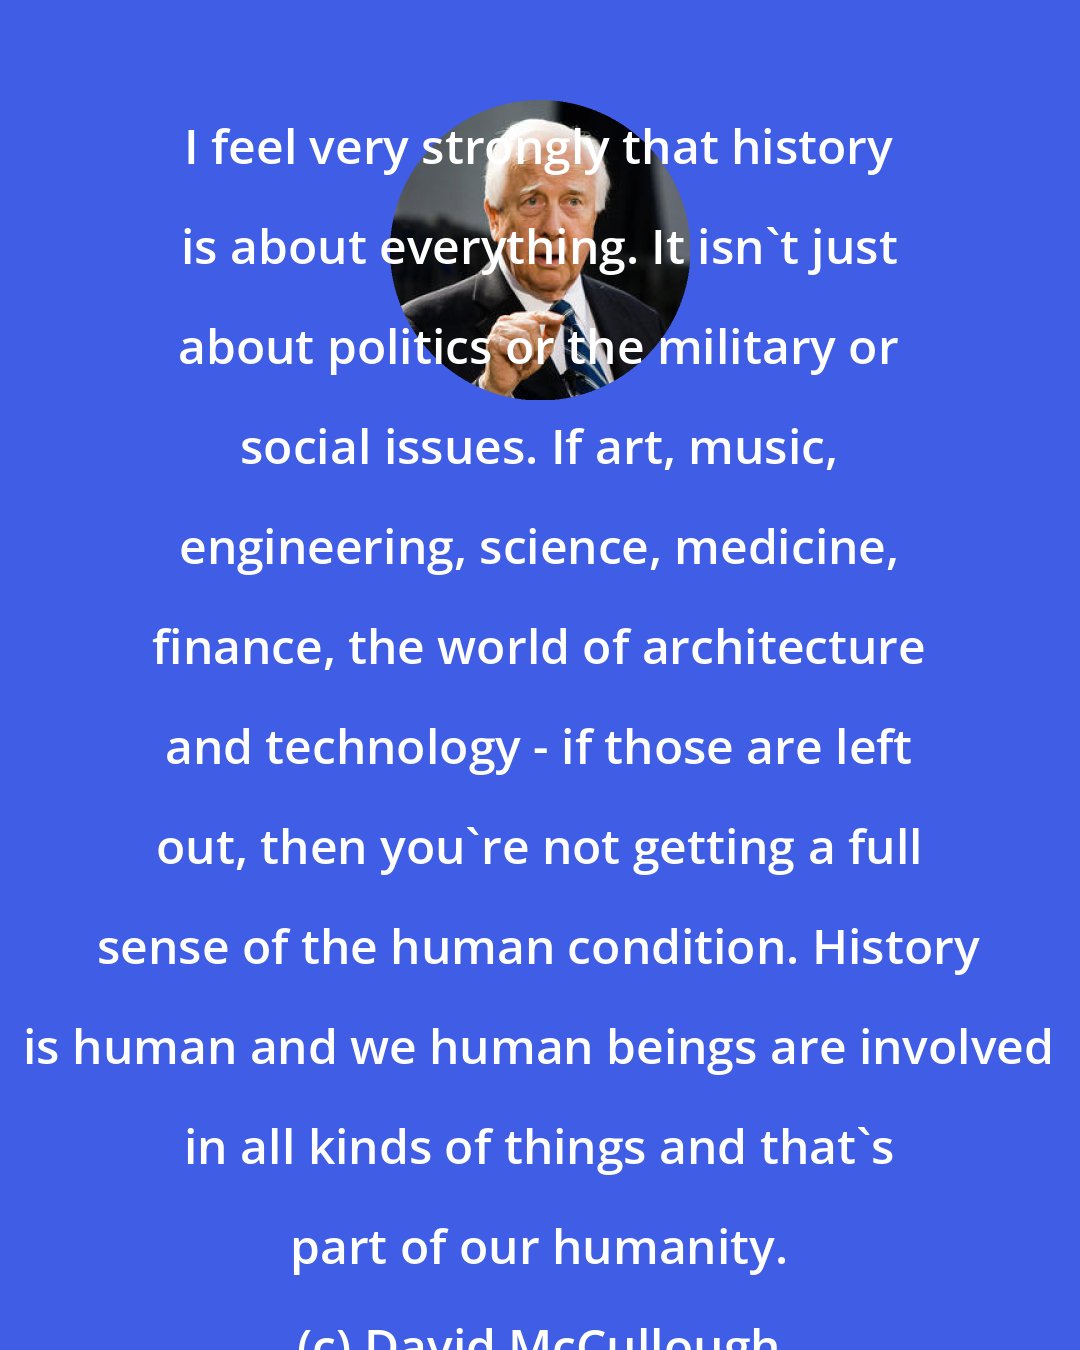 David McCullough: I feel very strongly that history is about everything. It isn't just about politics or the military or social issues. If art, music, engineering, science, medicine, finance, the world of architecture and technology - if those are left out, then you're not getting a full sense of the human condition. History is human and we human beings are involved in all kinds of things and that's part of our humanity.